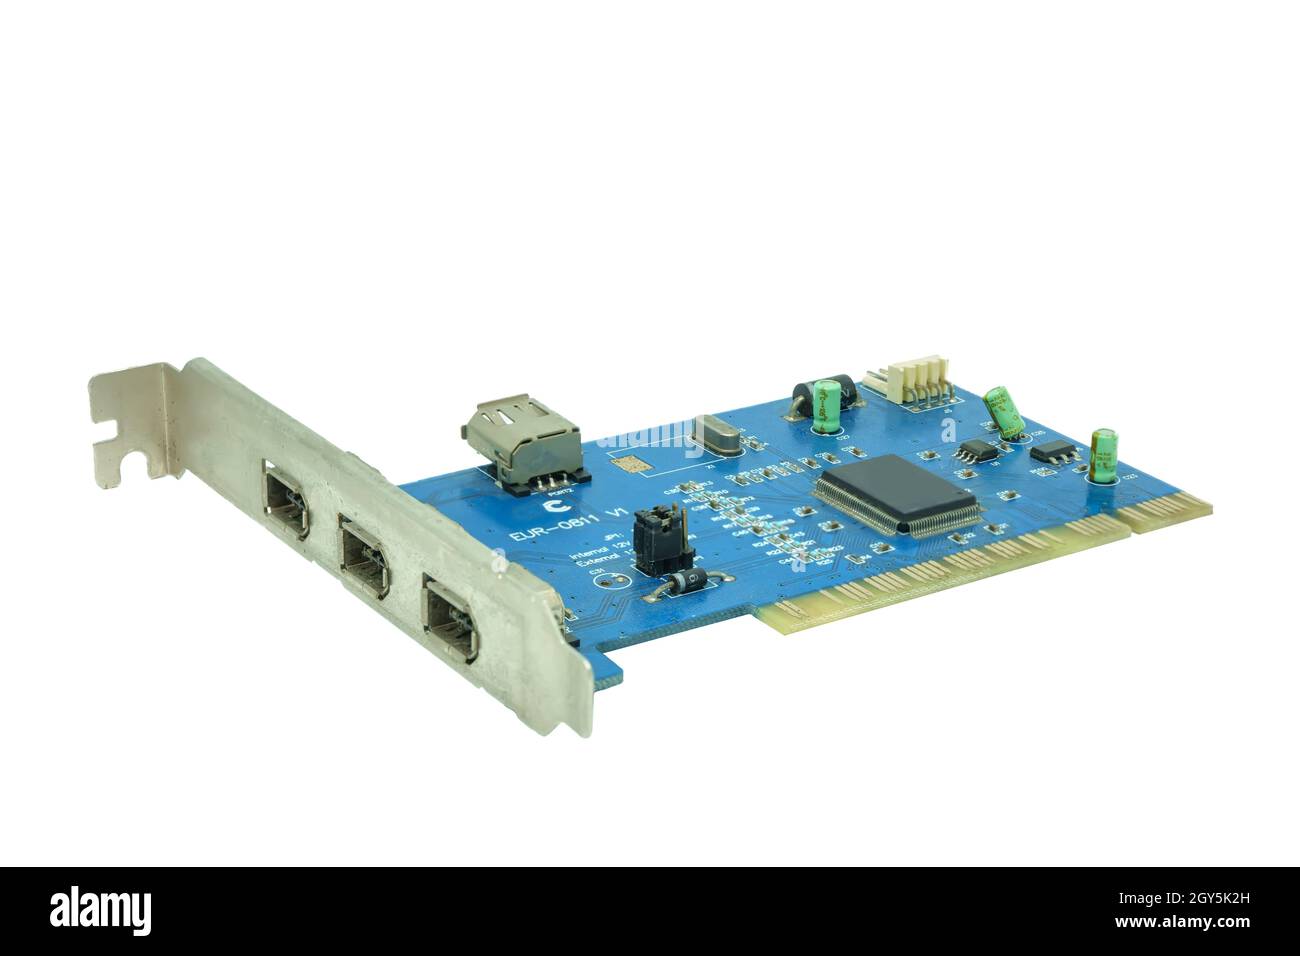 3 Port 1394 PCI express fireWire card isolated on a white background. Stock Photo